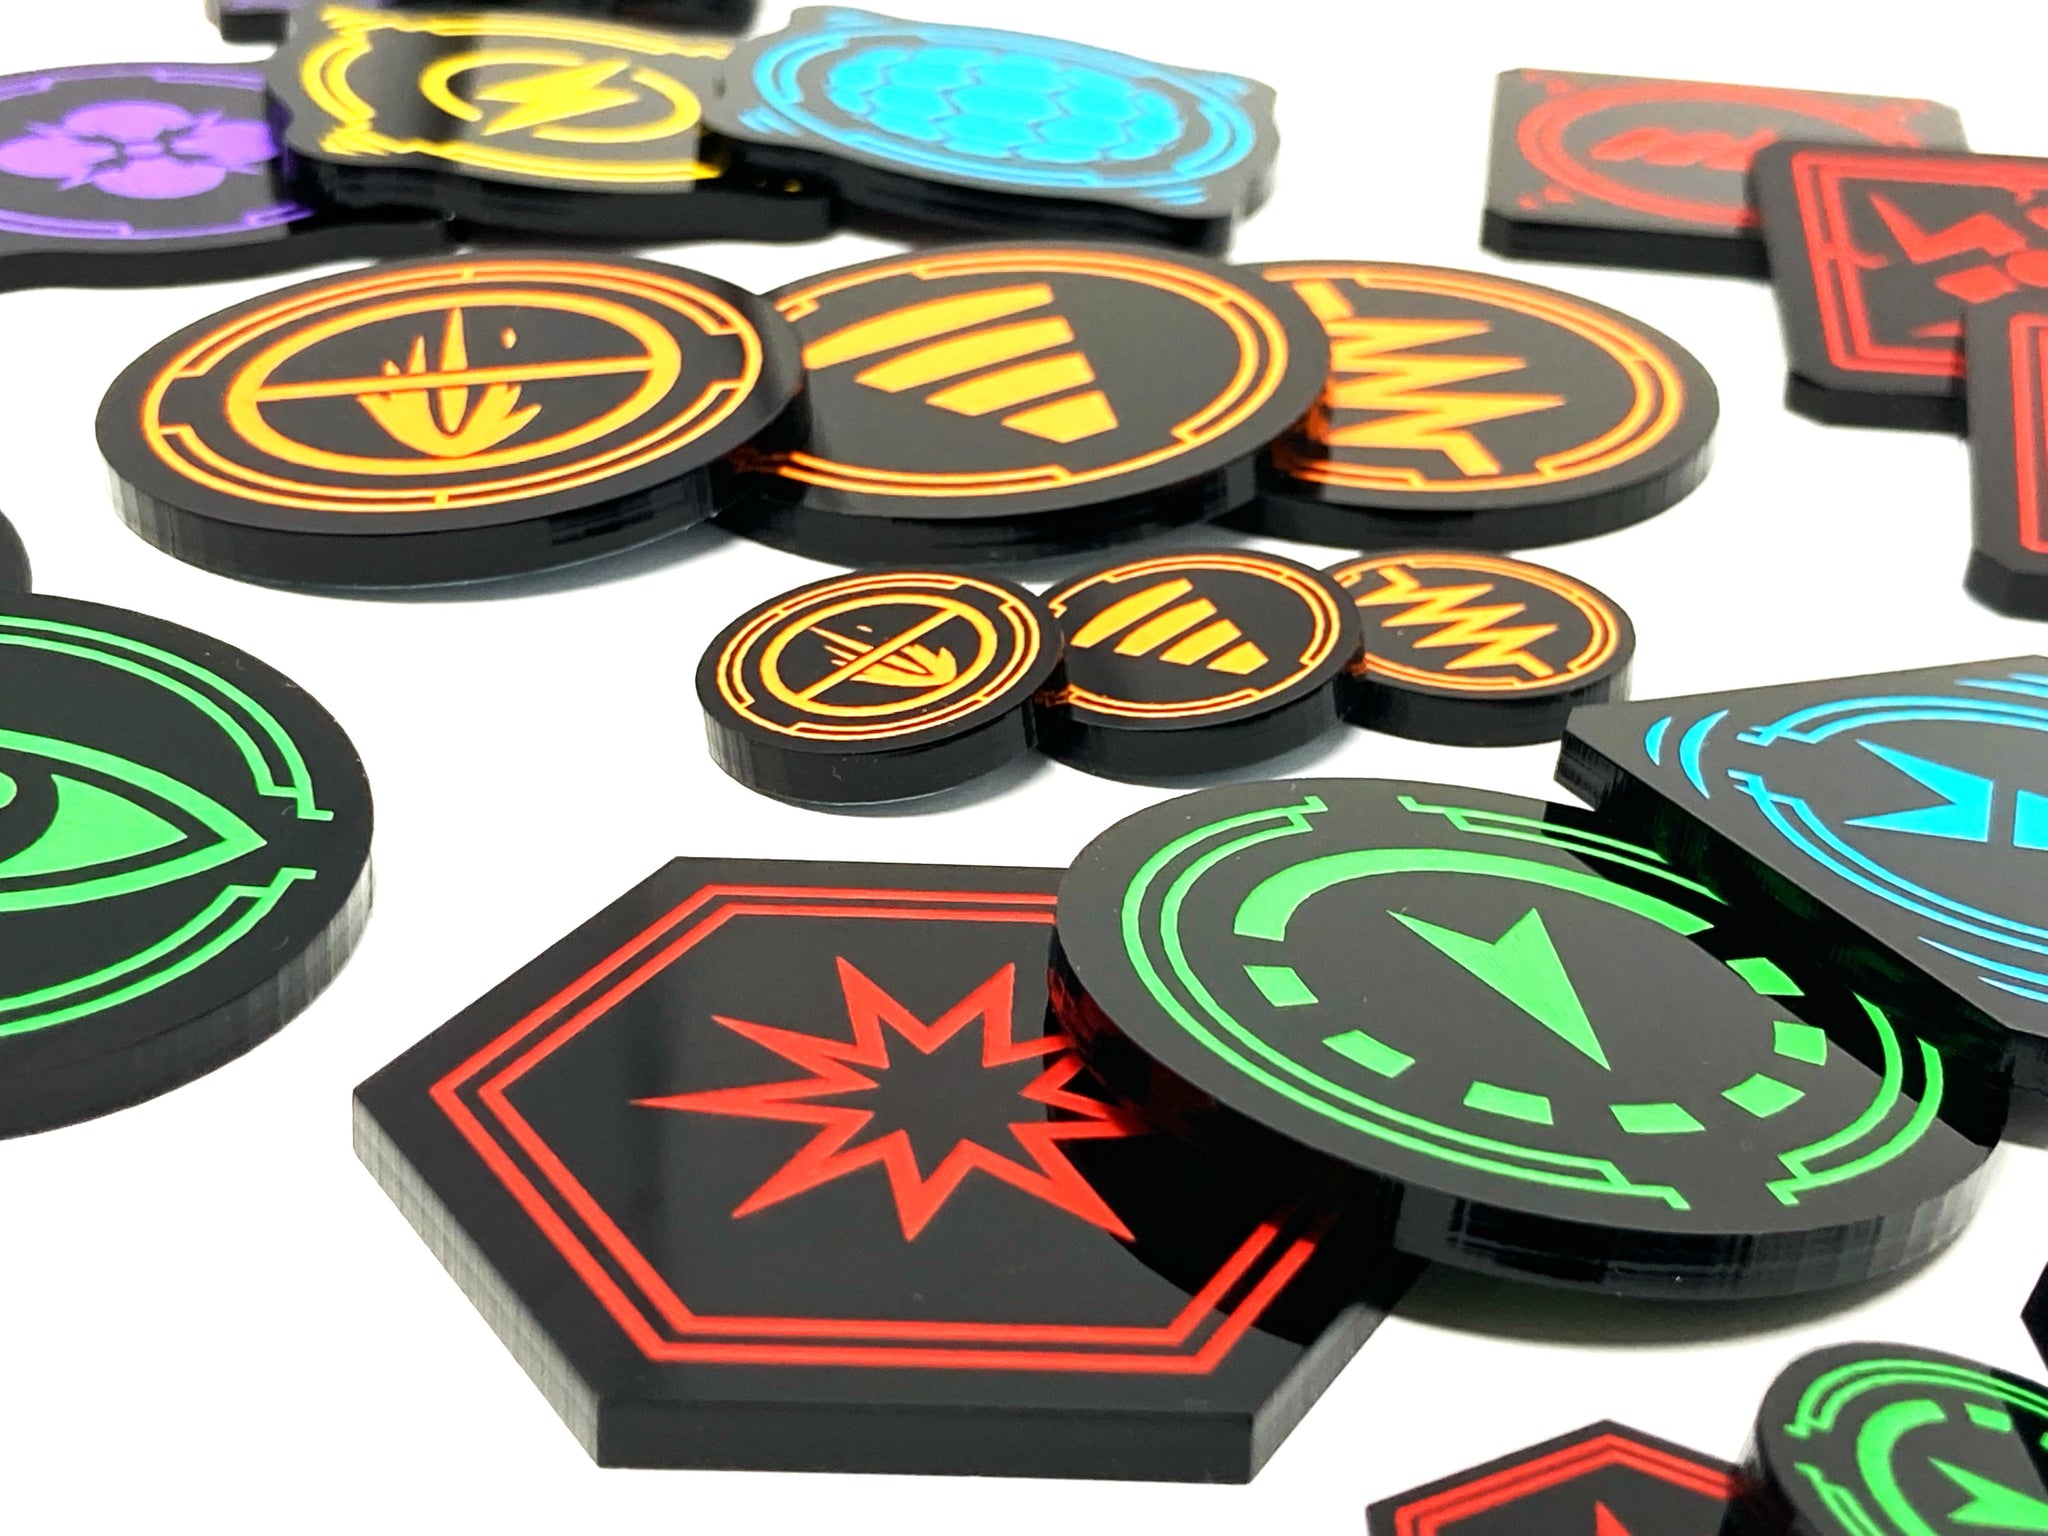 Over-Sized Tokens - Star Wars X-wing compatible